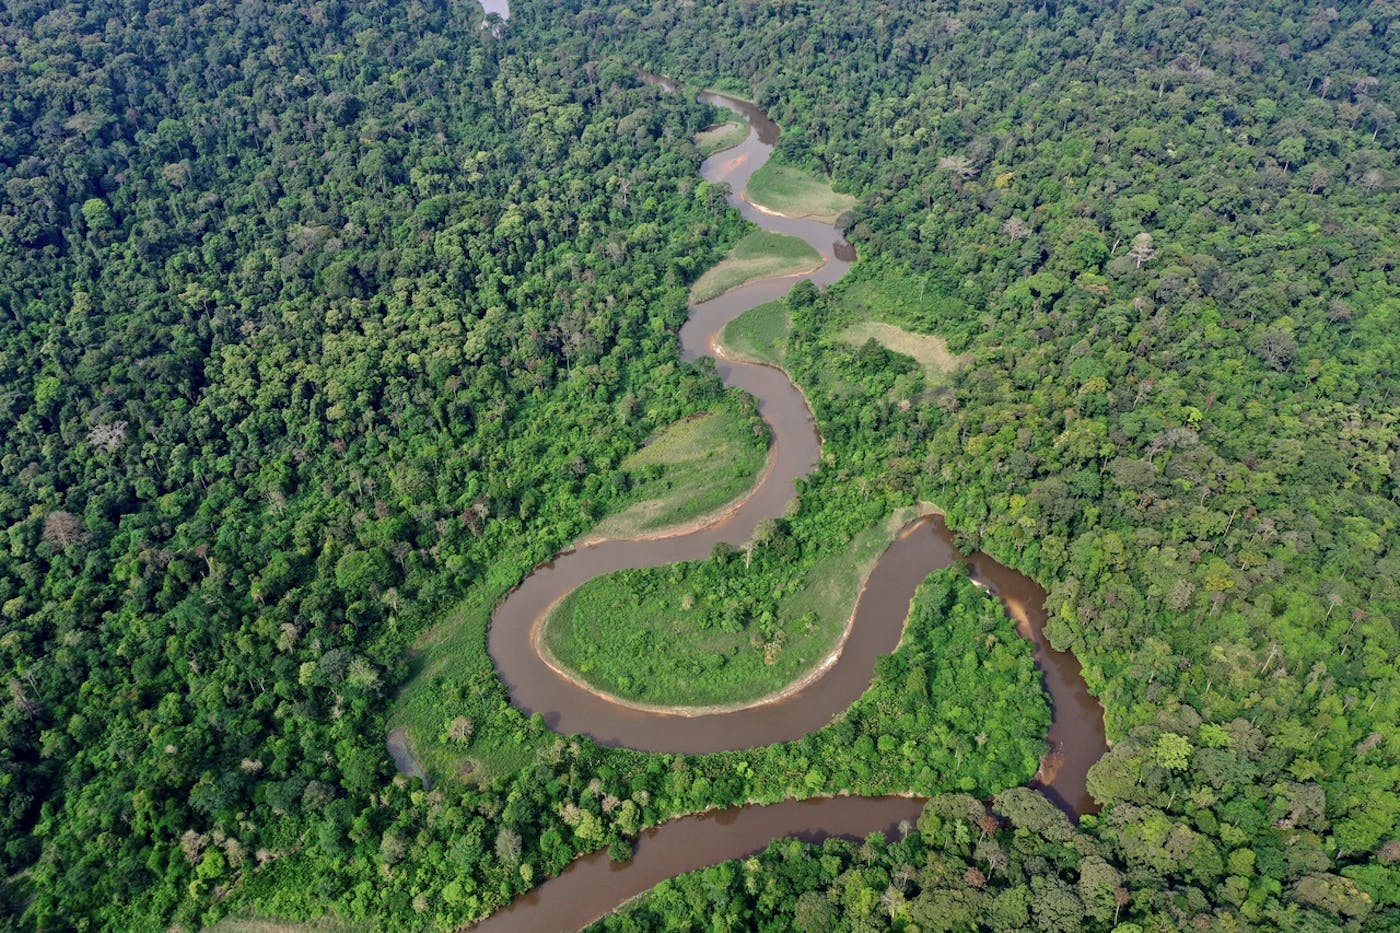 Protecting and restoring Conkouati-Douli in the Congo Basin